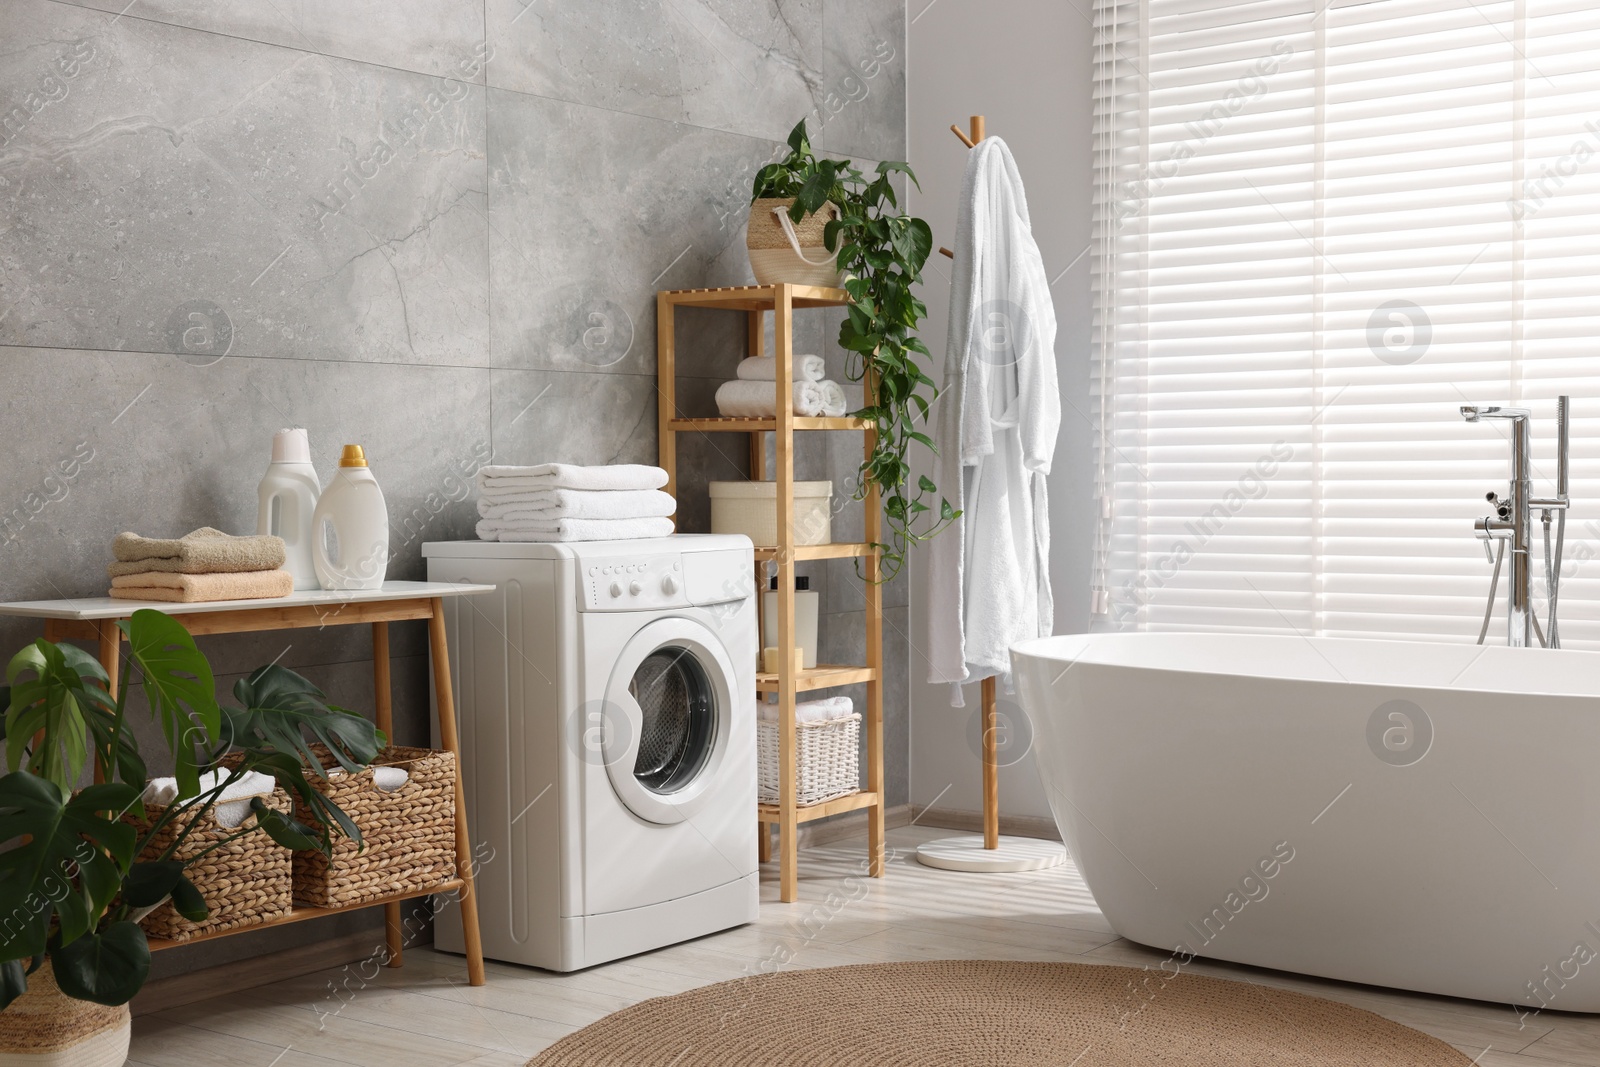 Photo of Clean towels, washing machine, plants and deterrents in bathroom